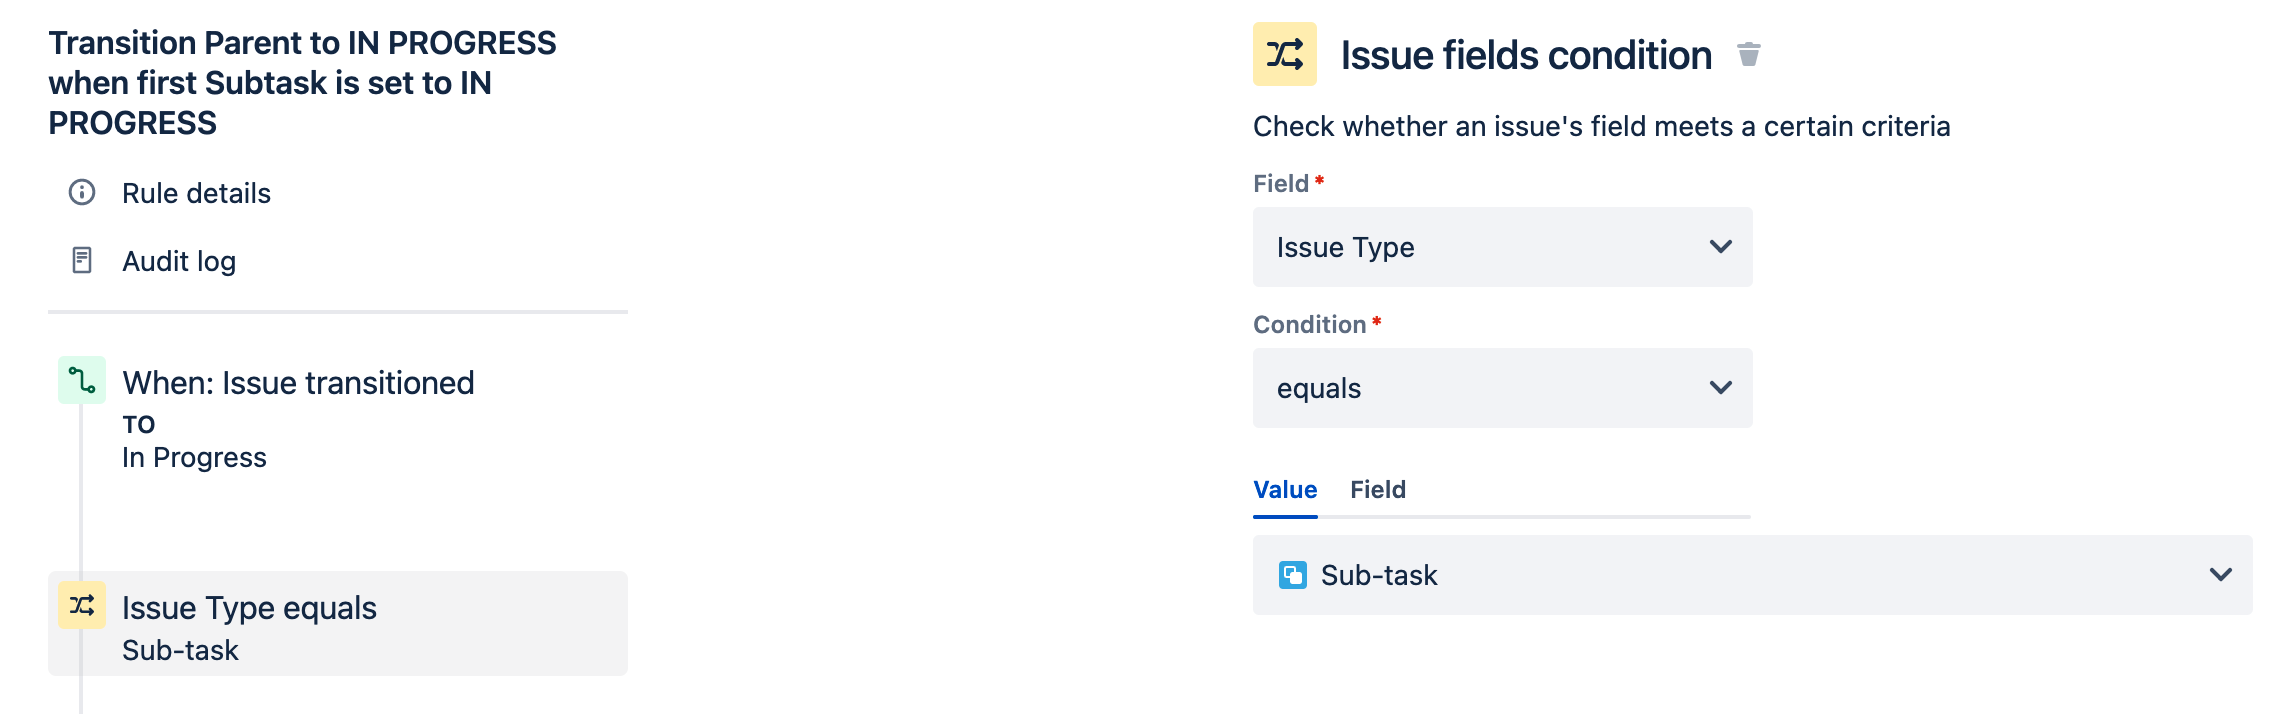 Use issue fields condition